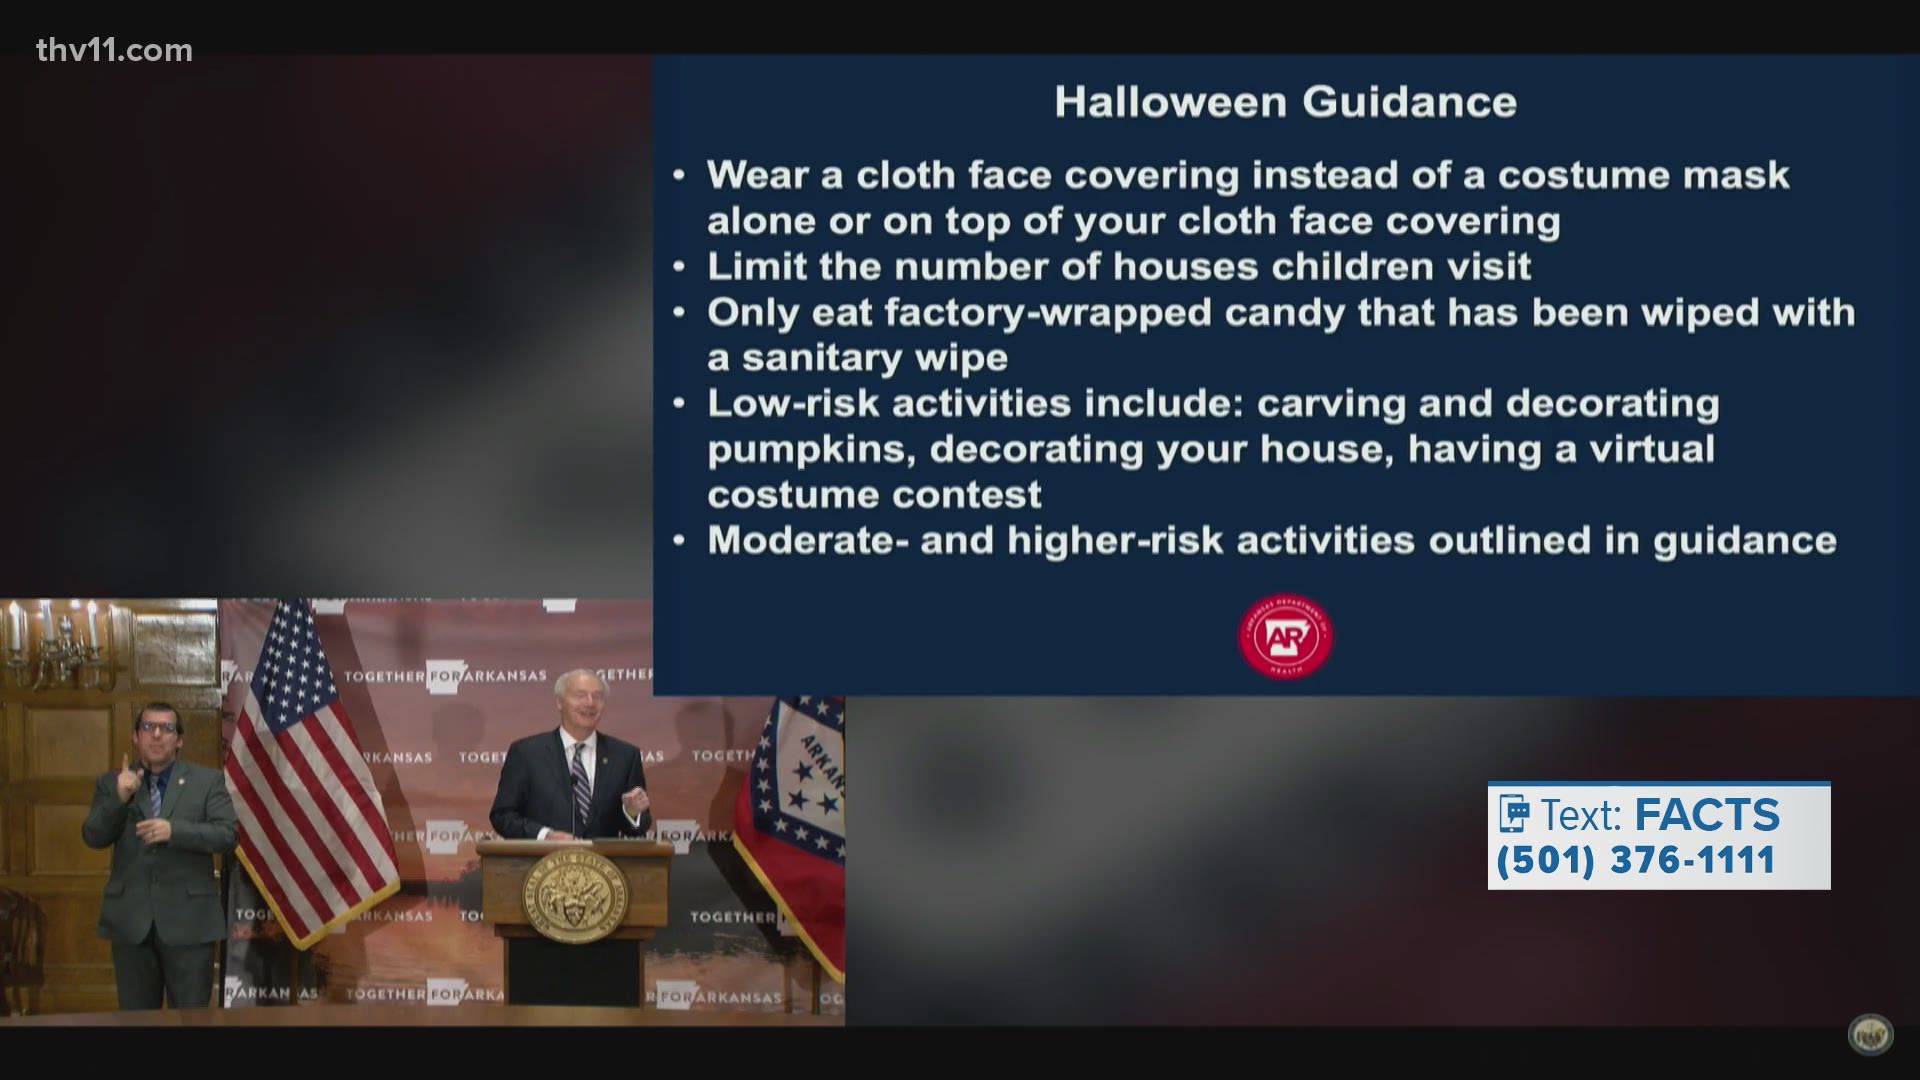 Gov. Hutchinson outlined some guidelines for children and parents who want to trick-or-treat during Halloween while we're still in a pandemic.